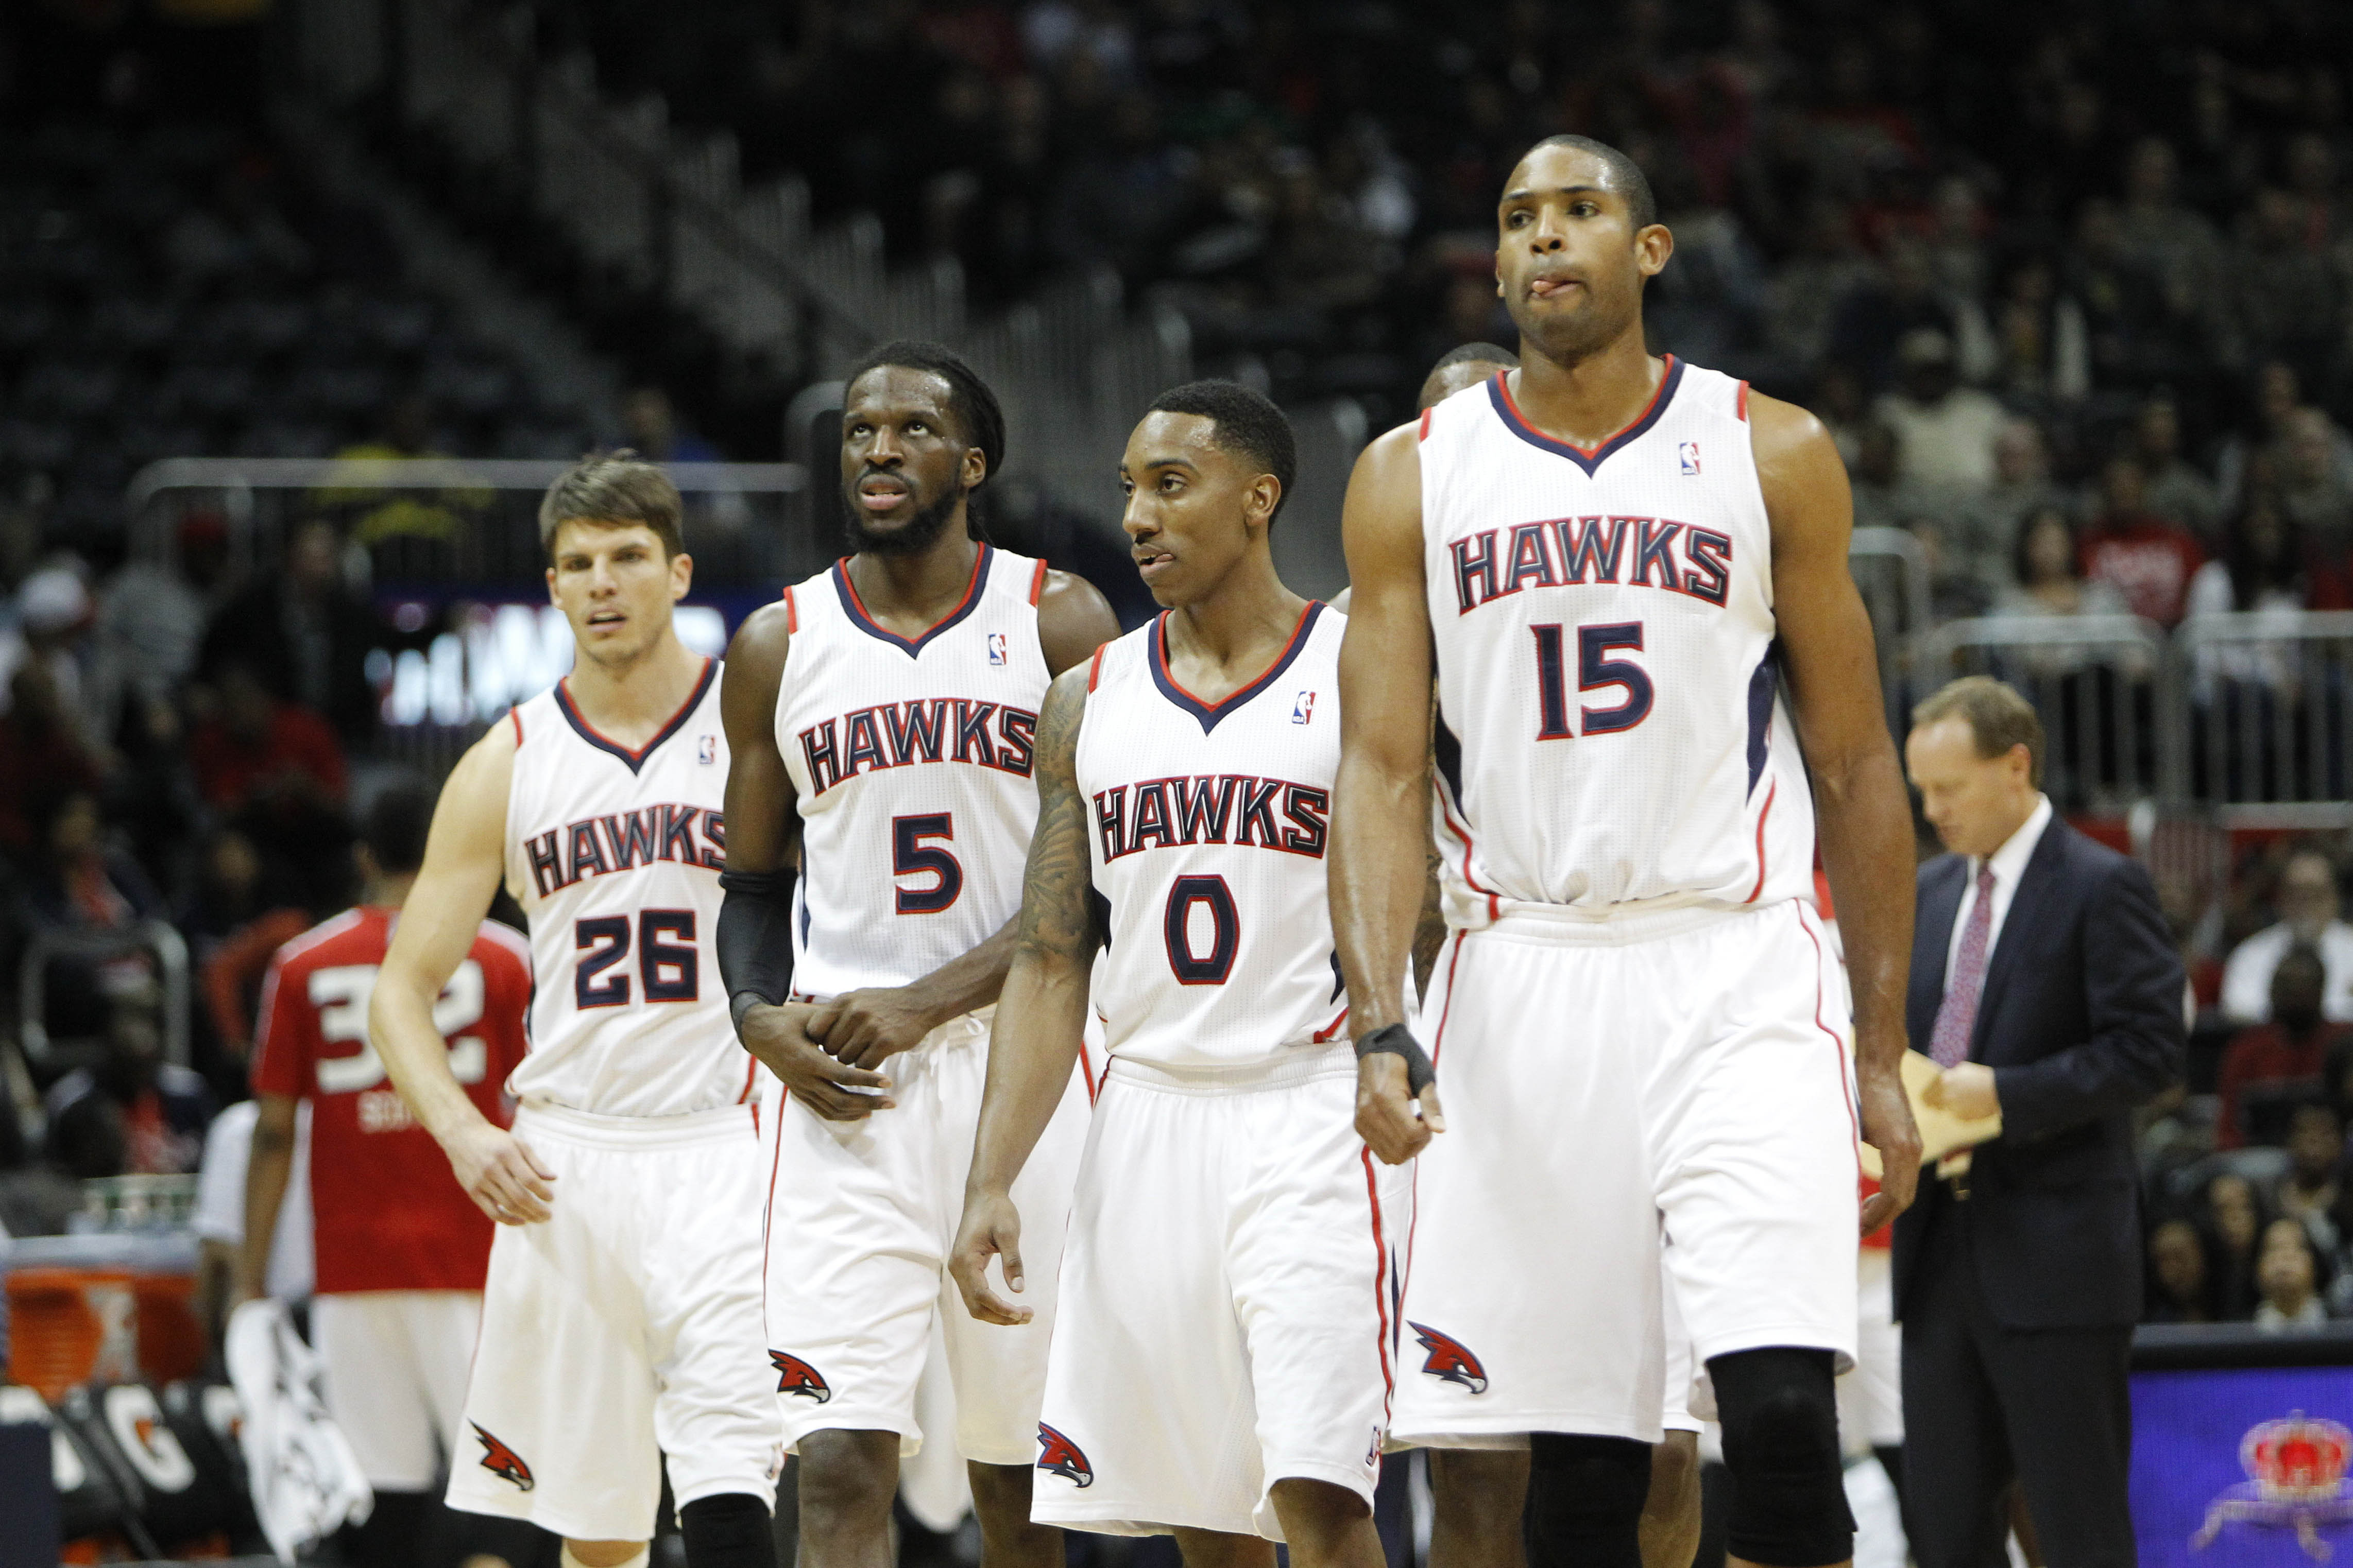 Kyle Korver stays with Hawks for 4 years, $24 million, because